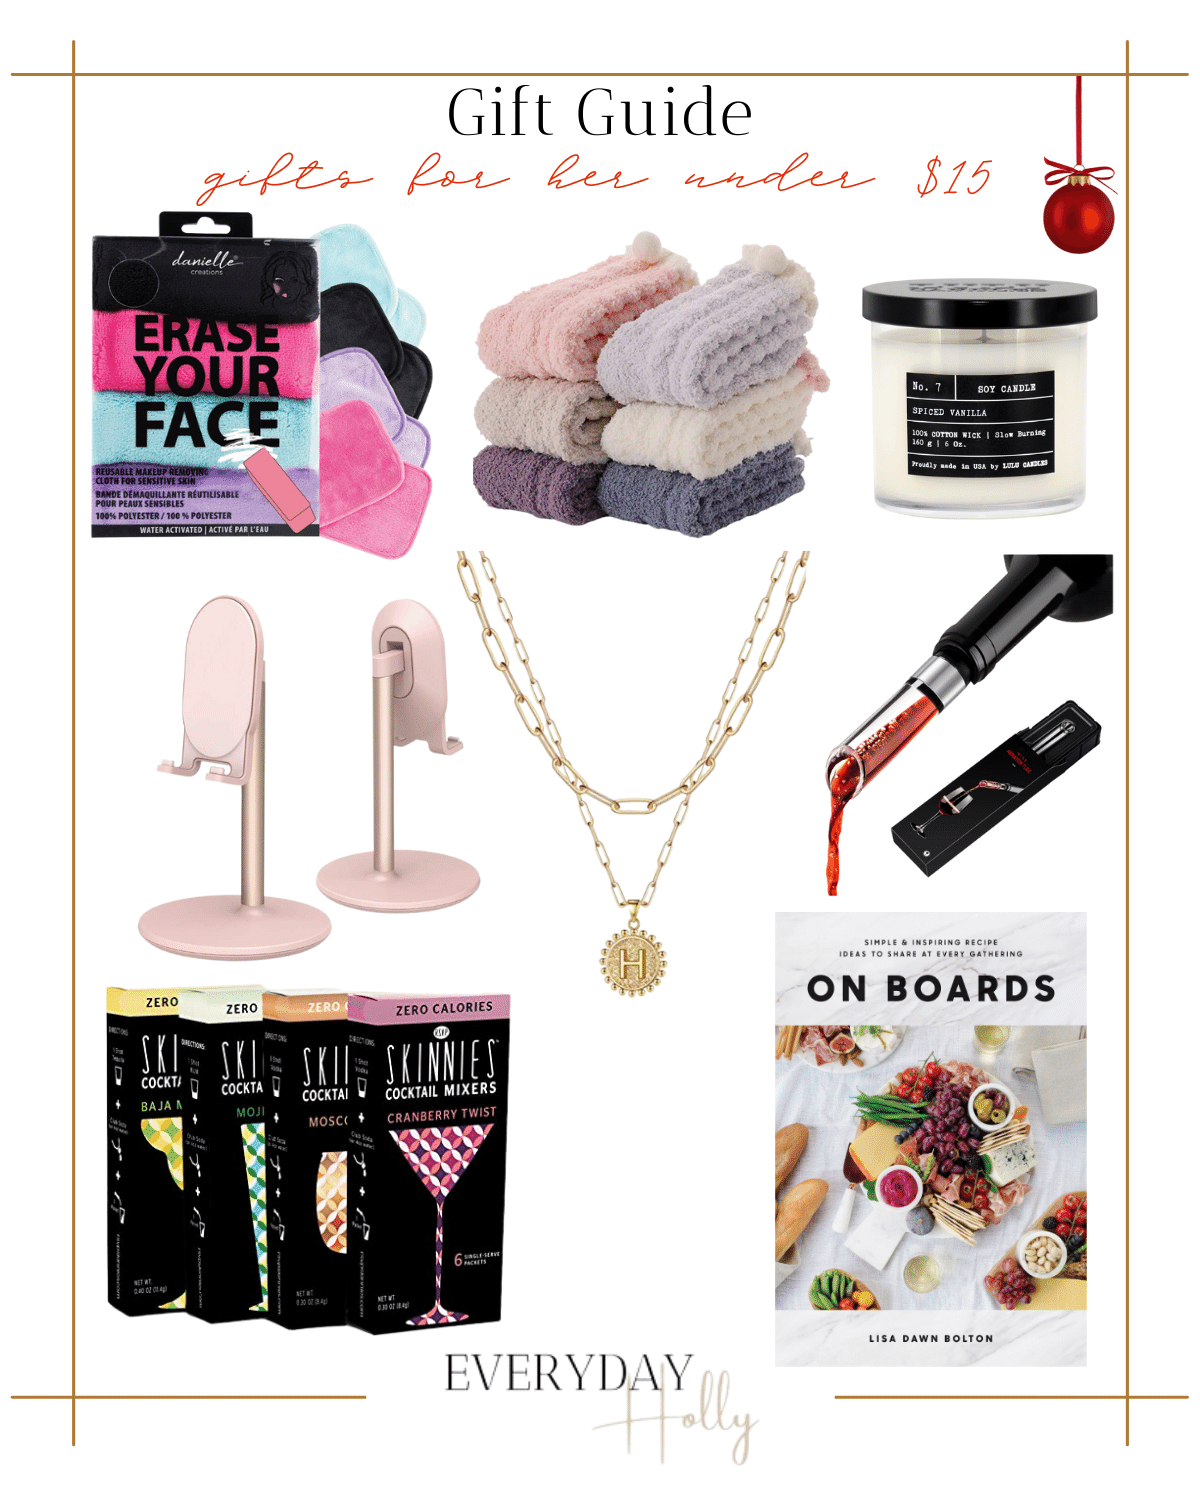 makeup removing face clothes, fuzzy socks, candle, phone stand, initial necklace, wine aerator, skinny cocktail mixers, on board cookbook, christmas gift ideas for under $15